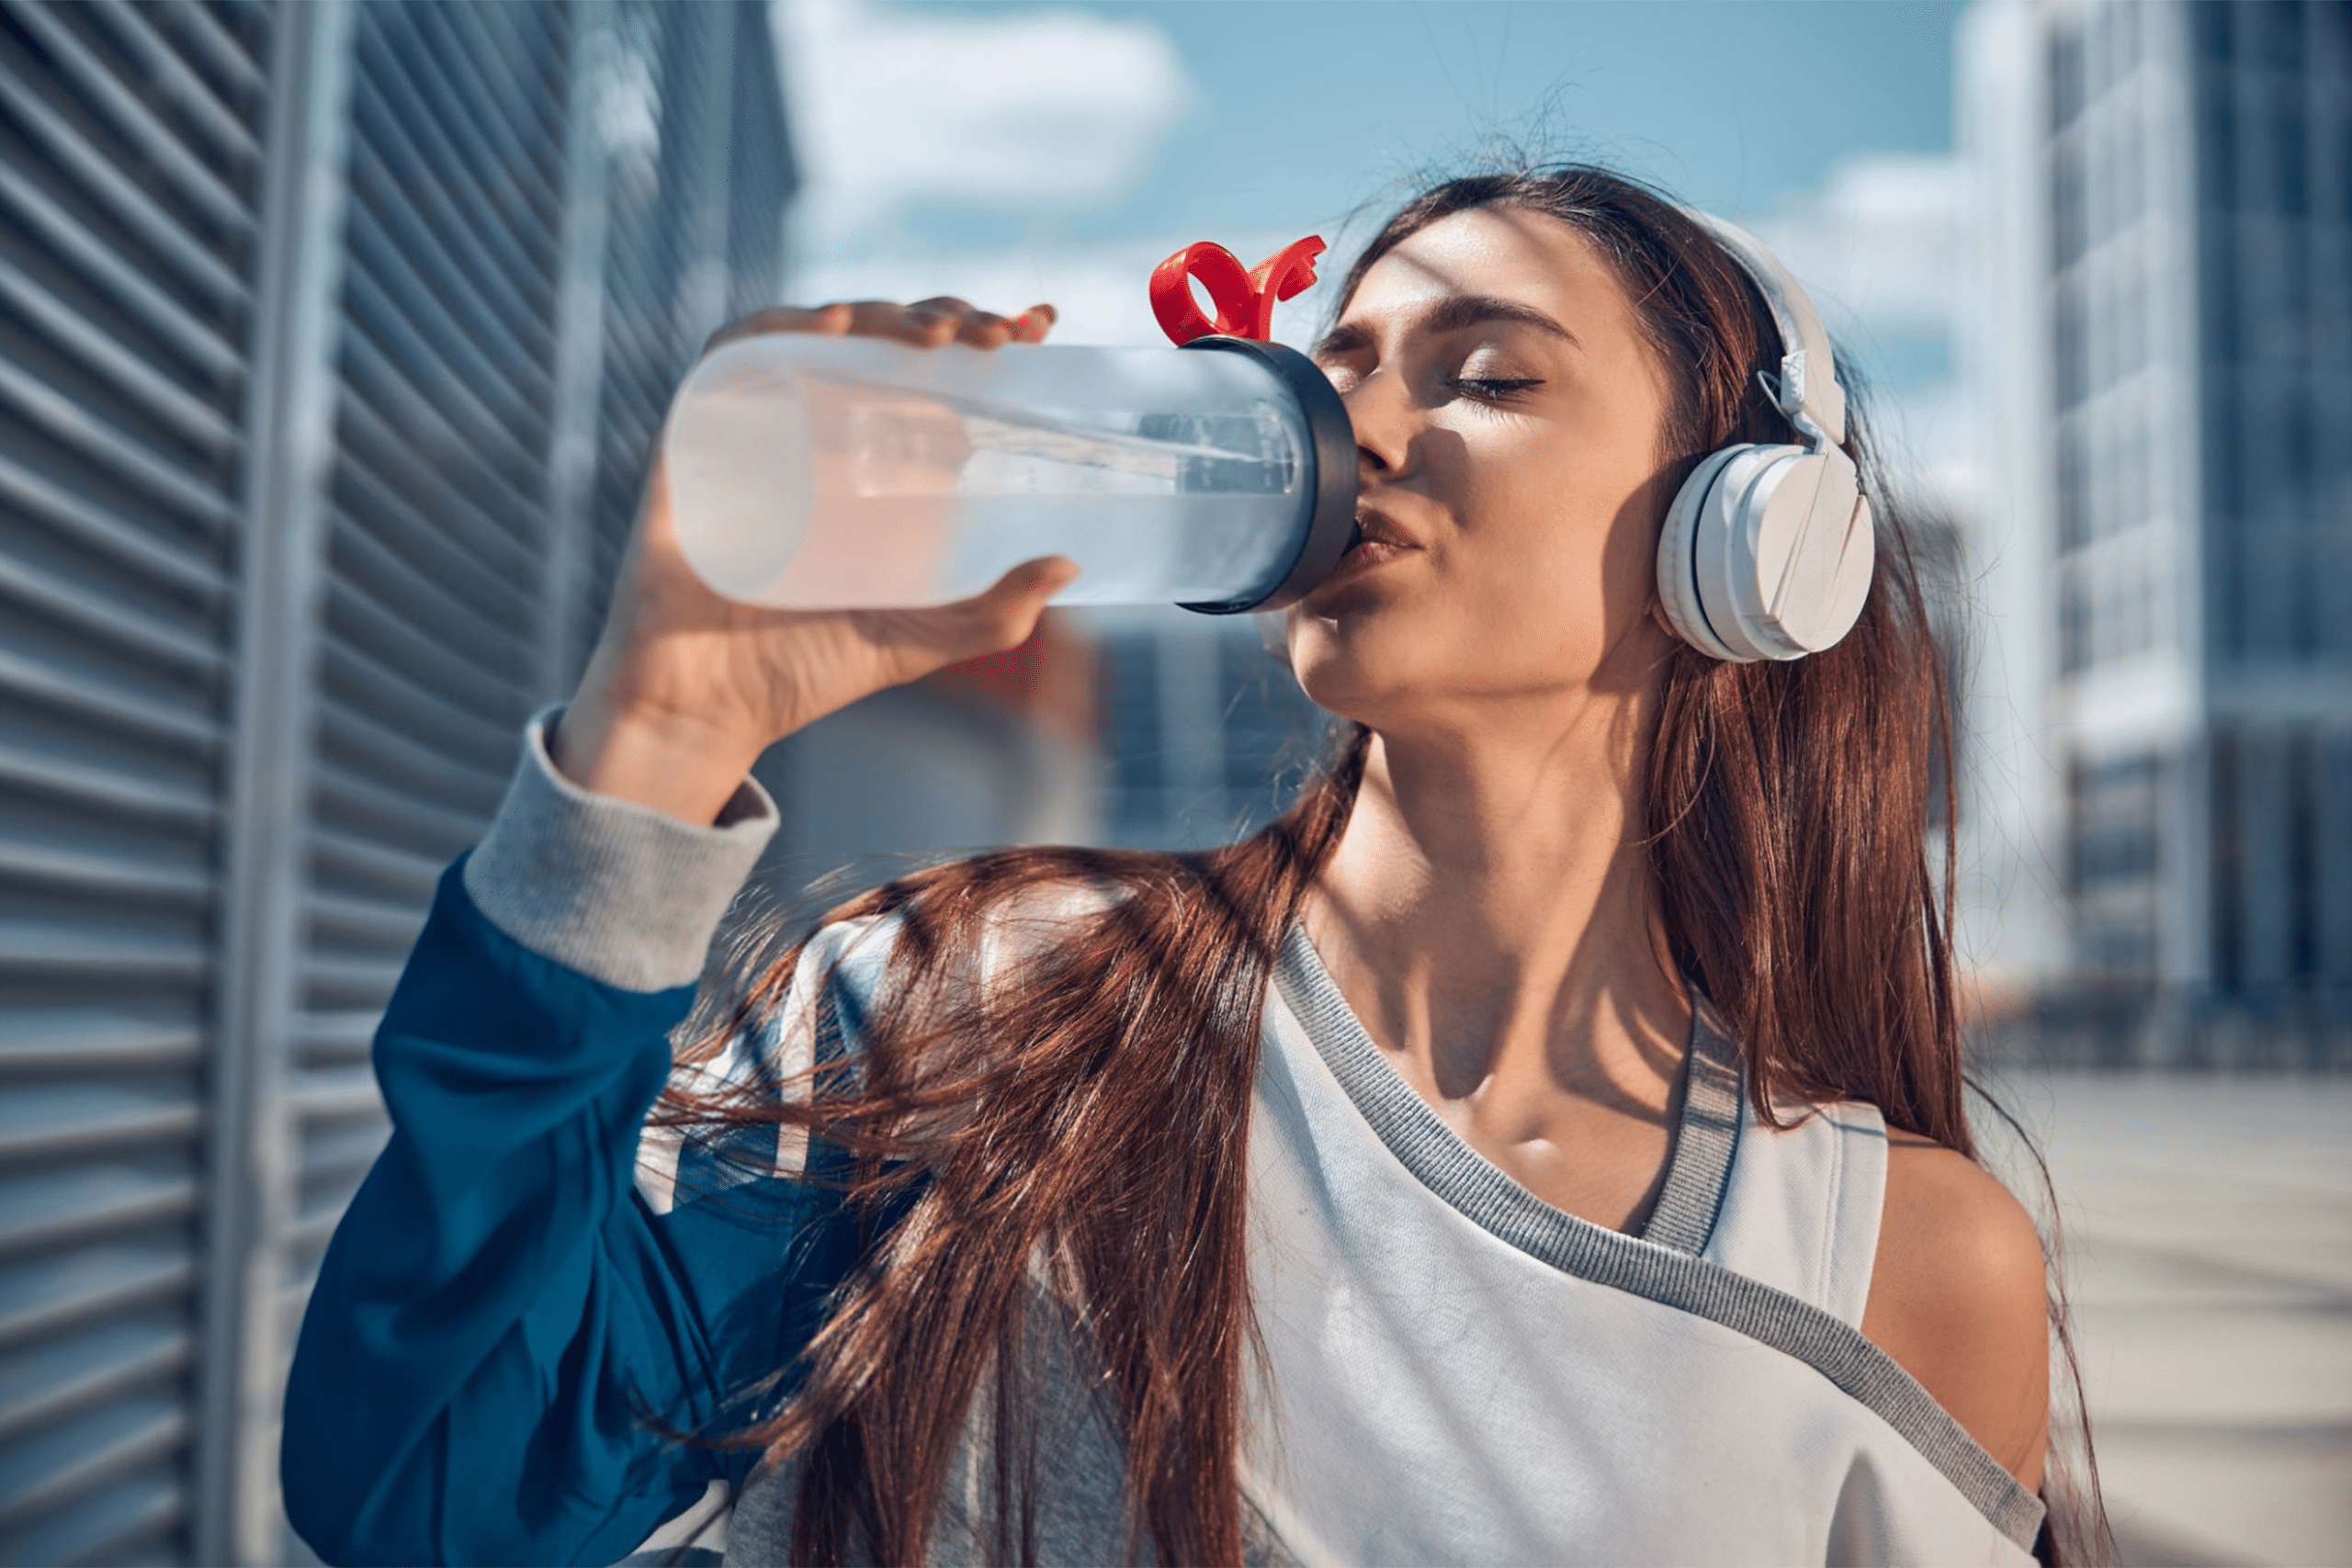 New study suggests we might be drinking too much water.